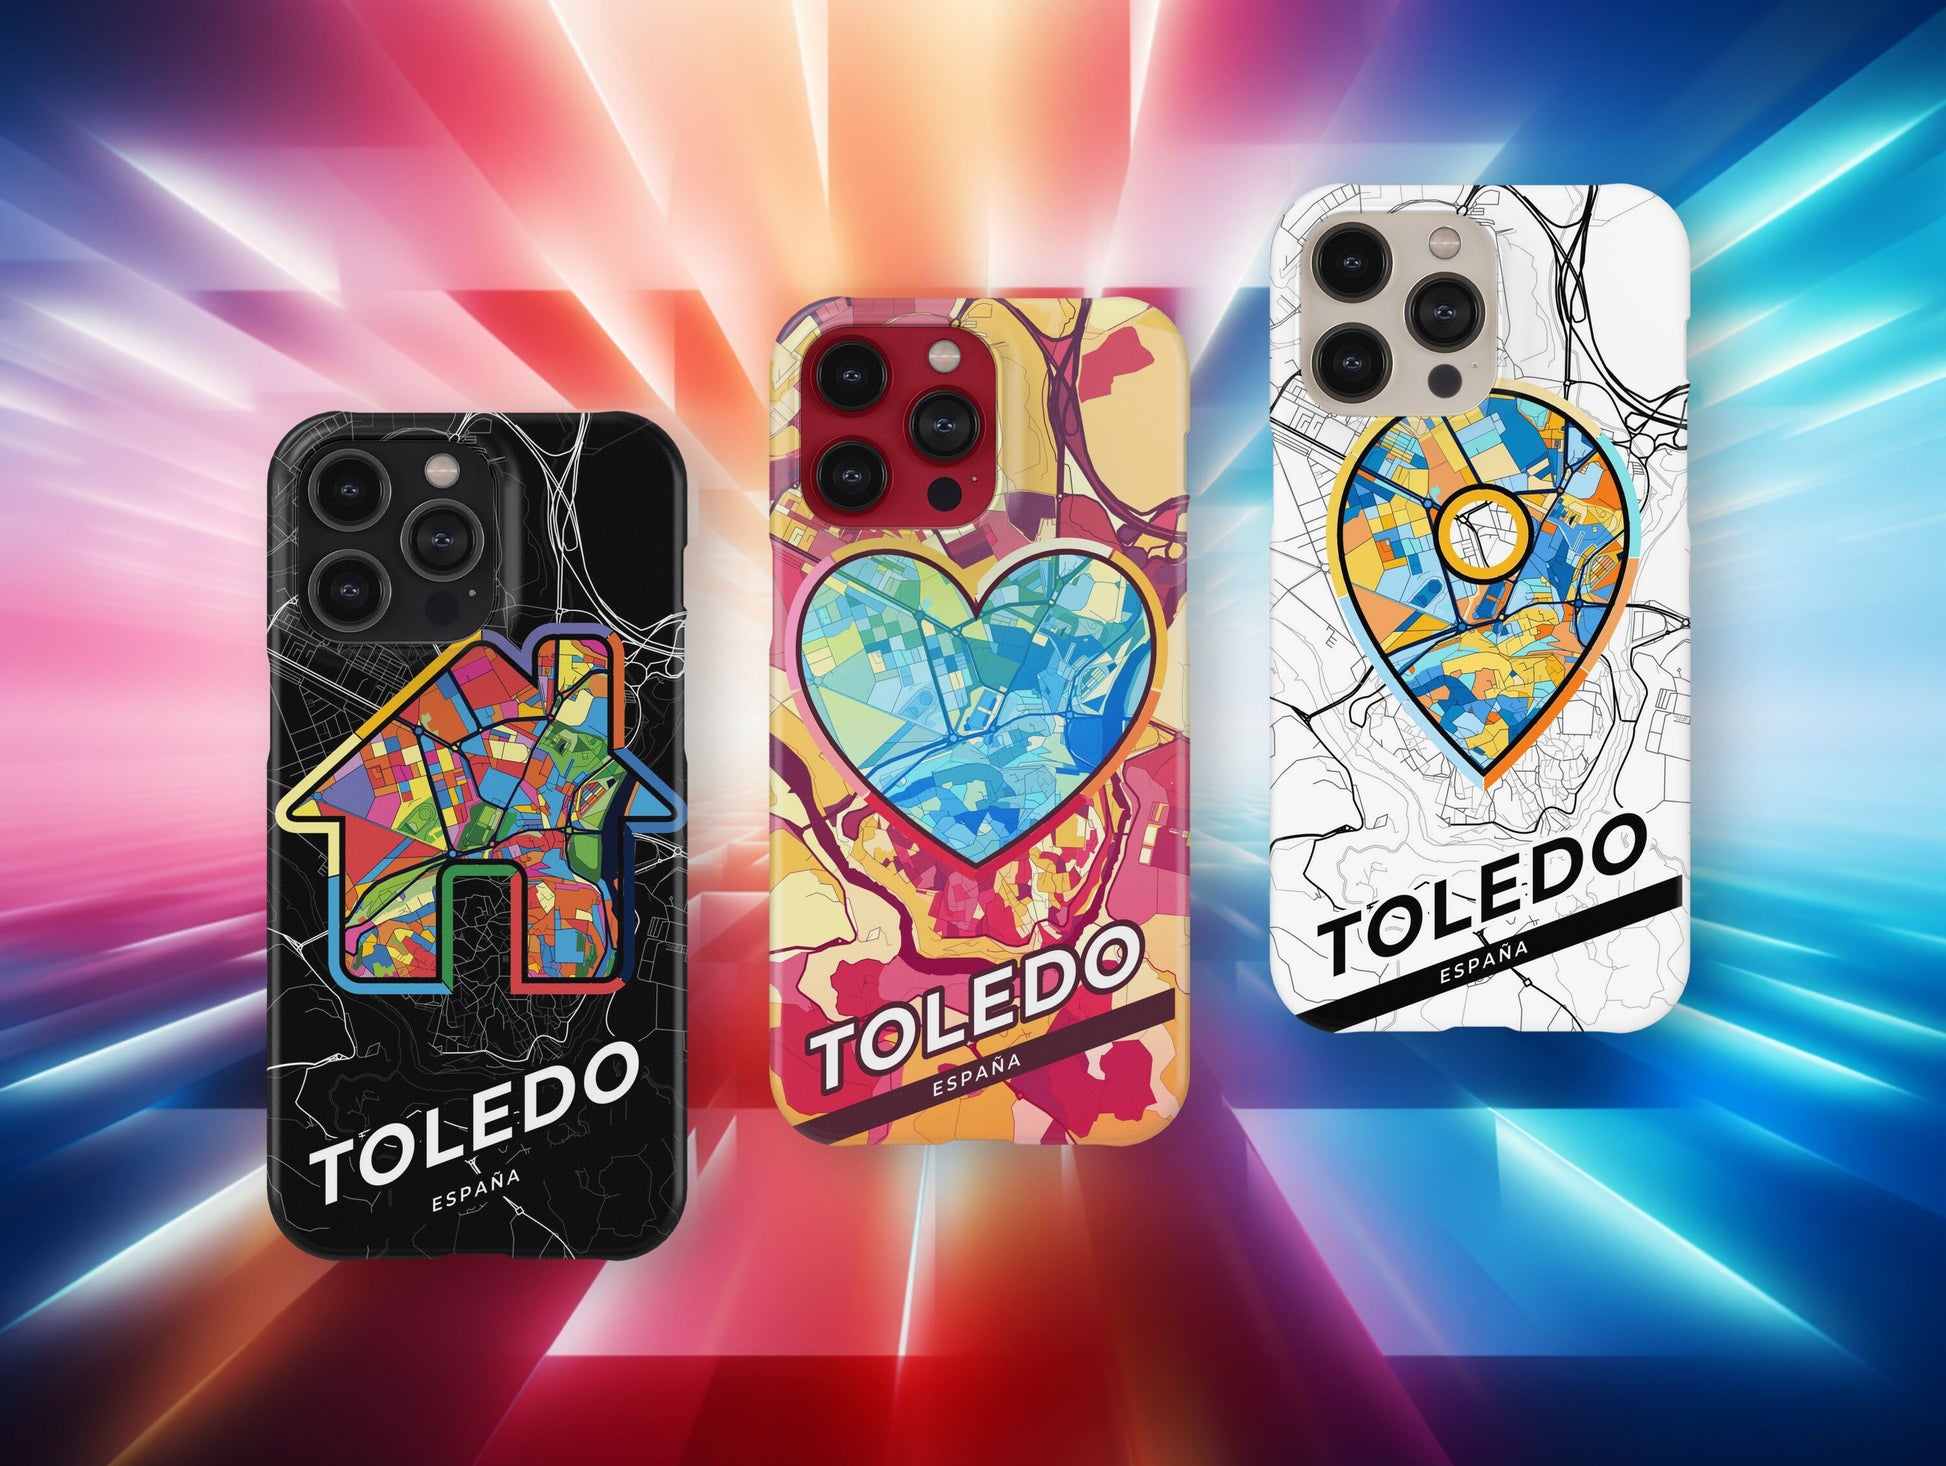 Toledo Spain slim phone case with colorful icon